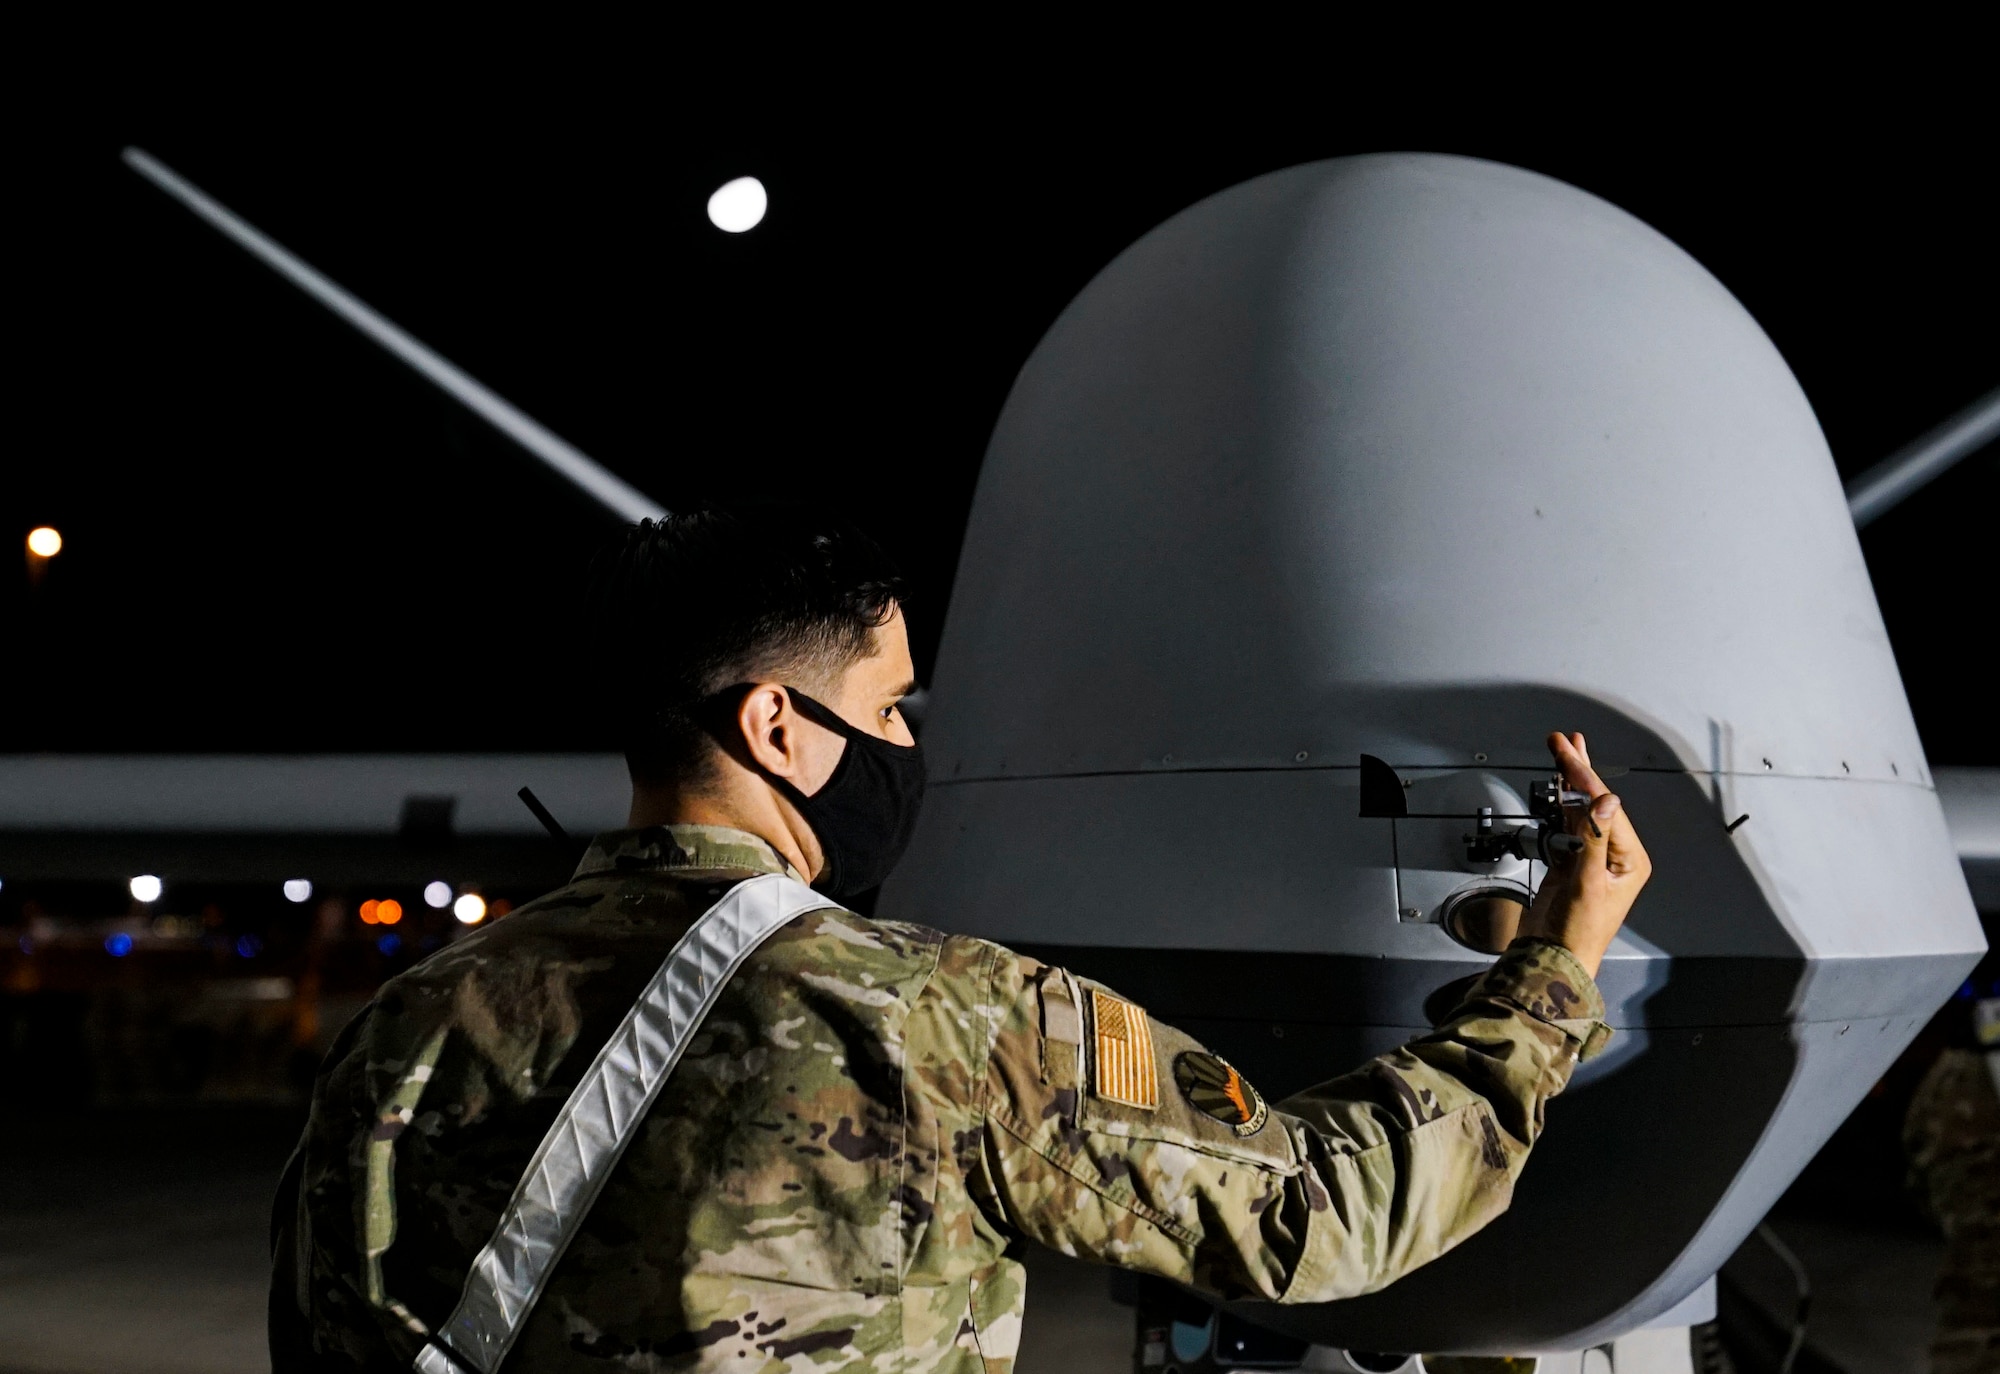 An MQ-9 Reaper maintainer checks the front nose of an MQ-9 during a preflight inspection at night.